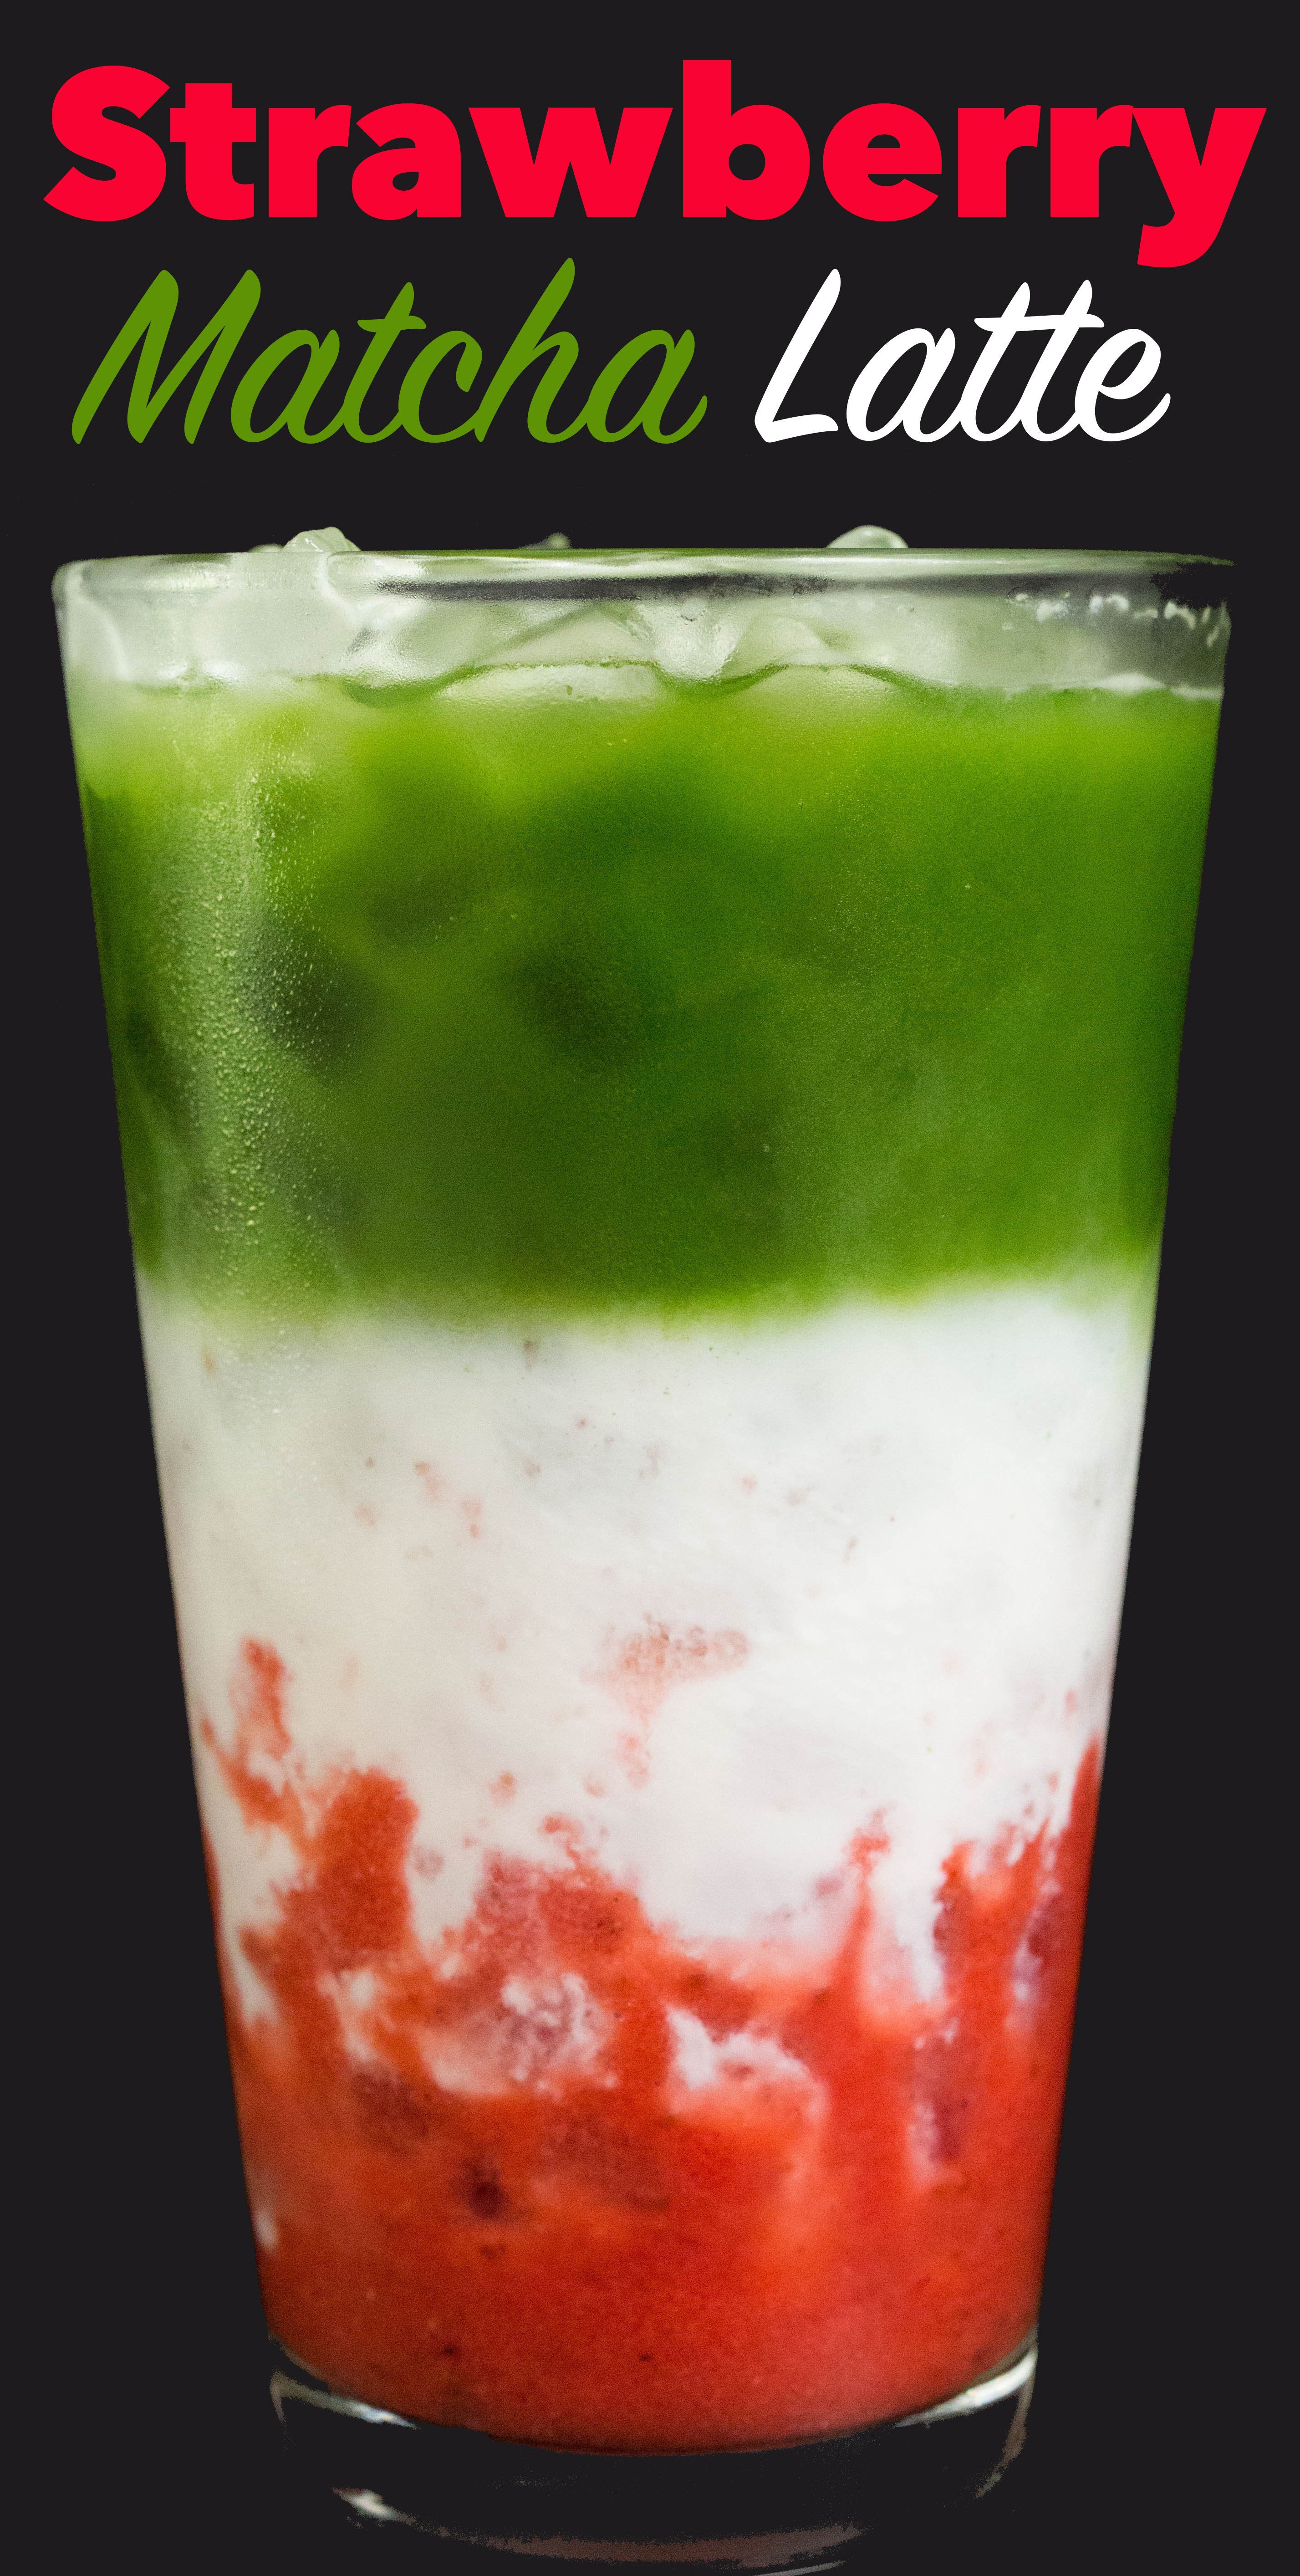 An Iced Strawberry Matcha Latte with text at the top that reads "Strawberry matcha latte".